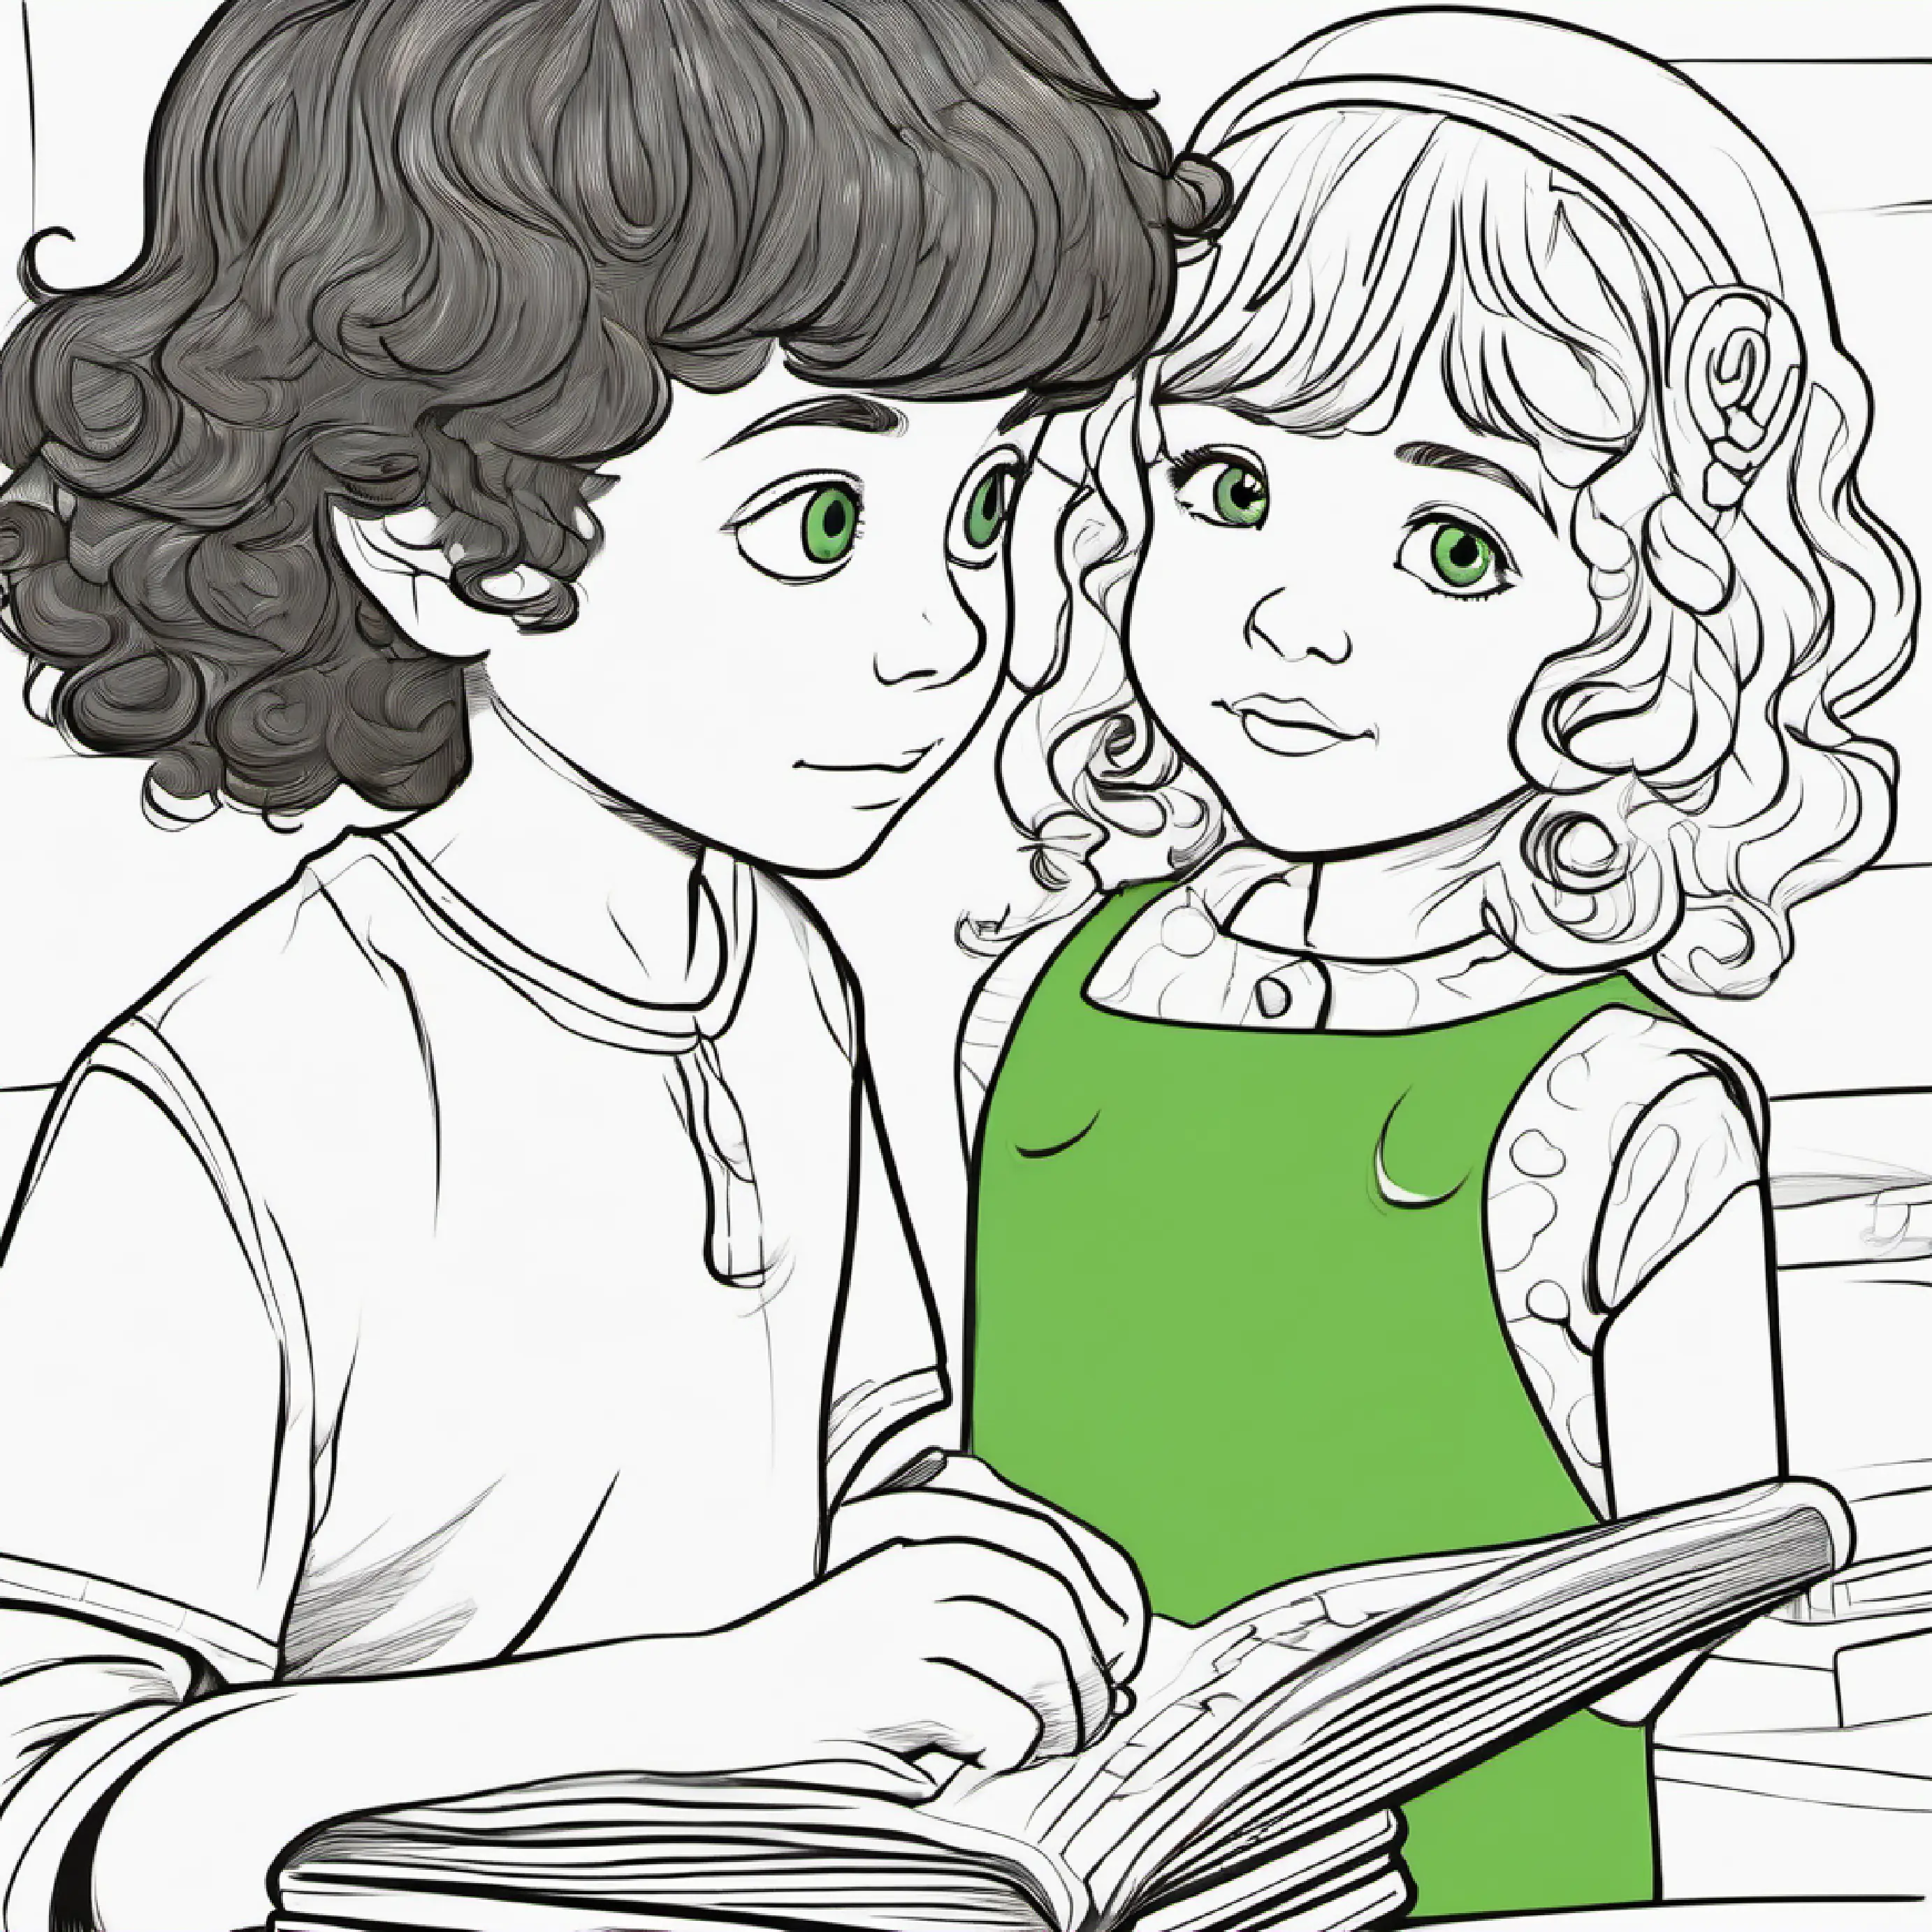 Little girl with bright green eyes and curly brown hair shares her own interests with New boy with short black hair and thoughtful brown eyes.